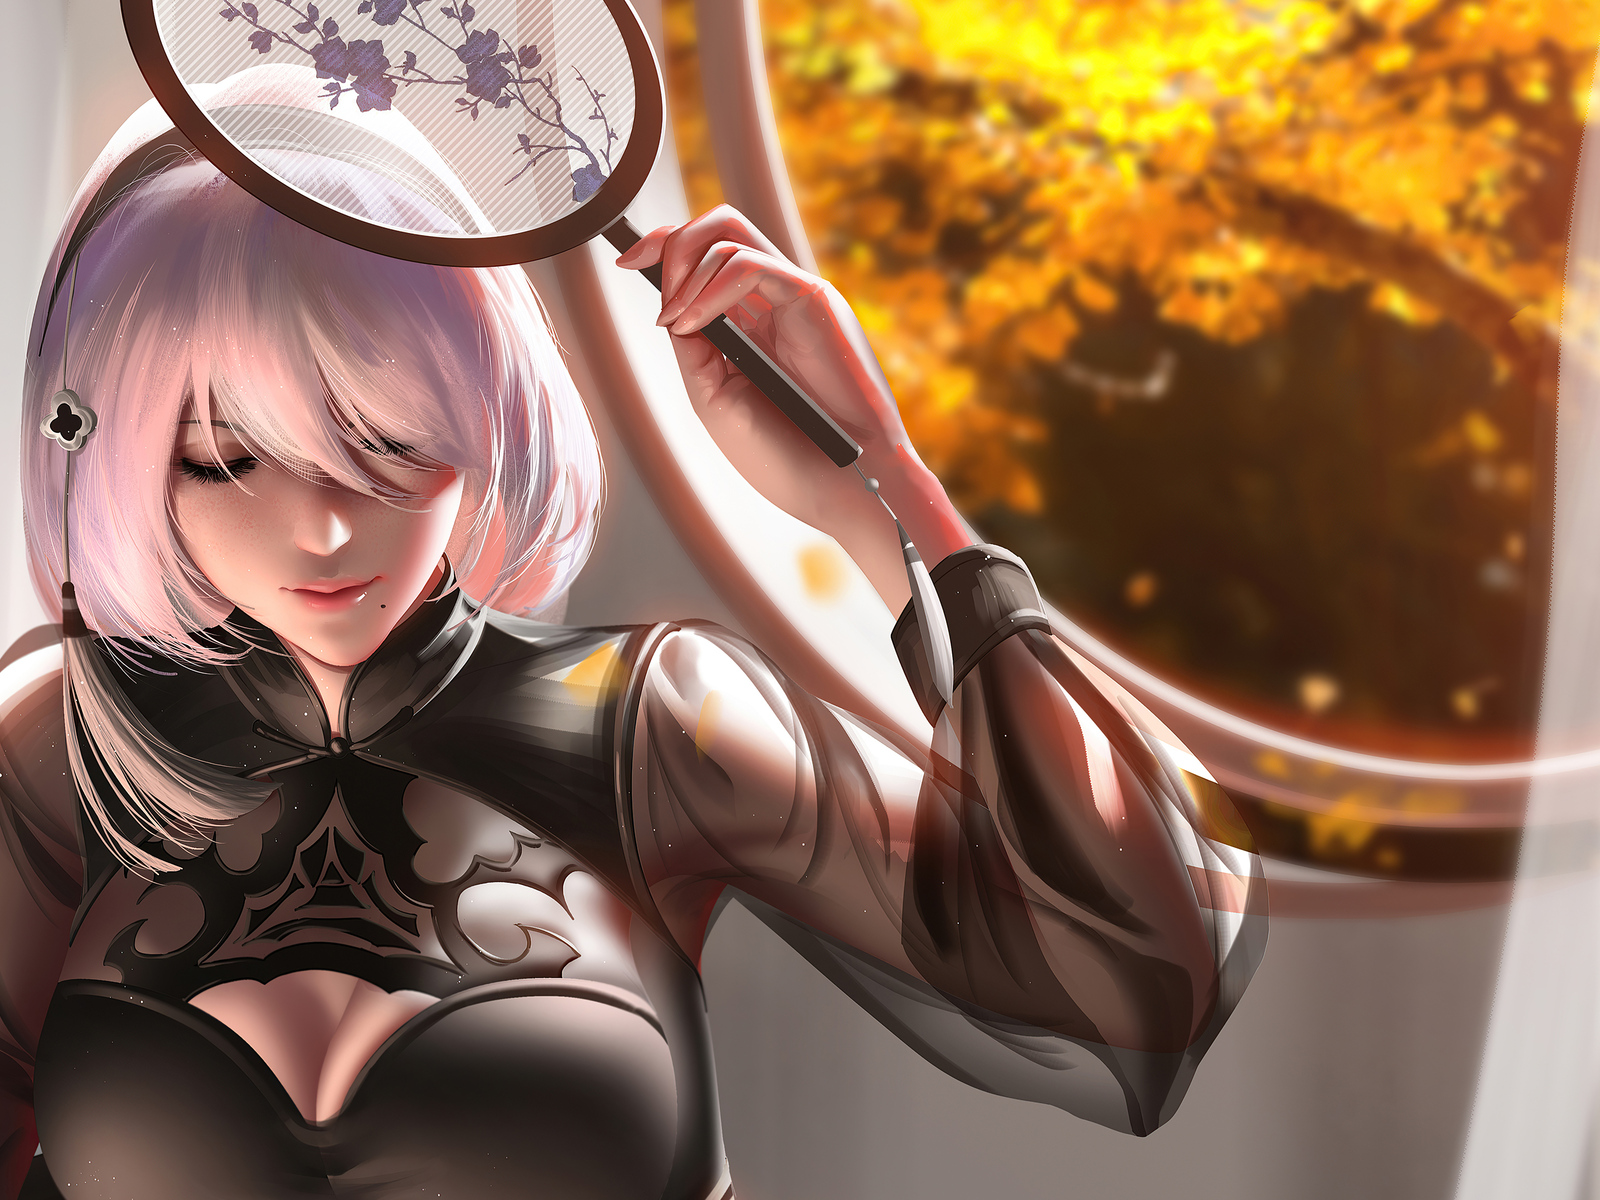 4k-wallpapers. nier-automata-wallpapers. games-wallpapers. hd-wallpapers. a...